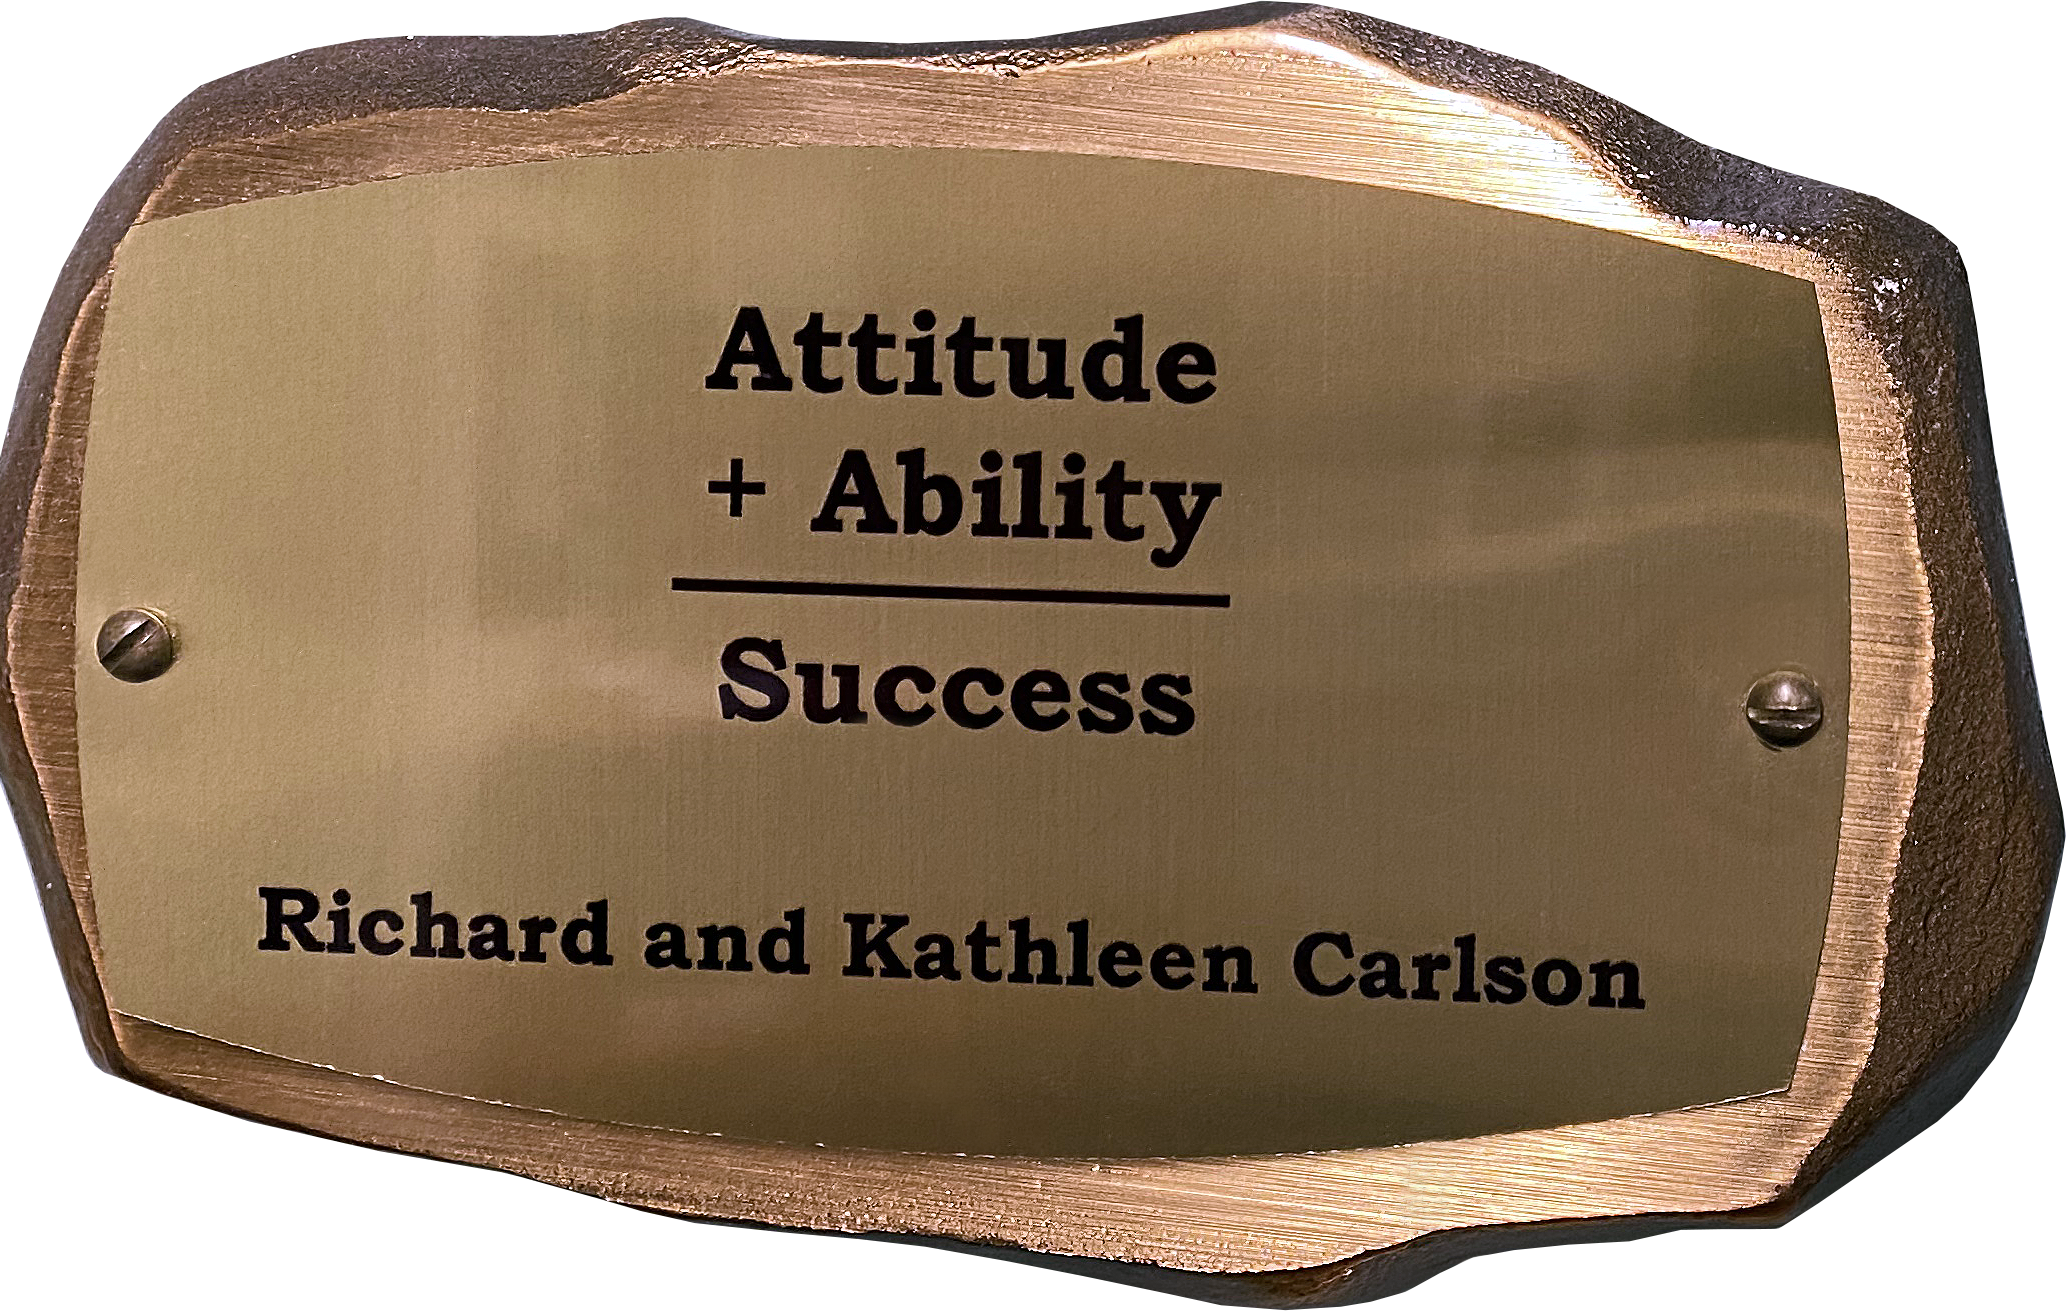 Inscribed bronze plaque in the shape of a rock with text on it reading: Attitude + Ability = Success. Richard and Kathleen Carlson